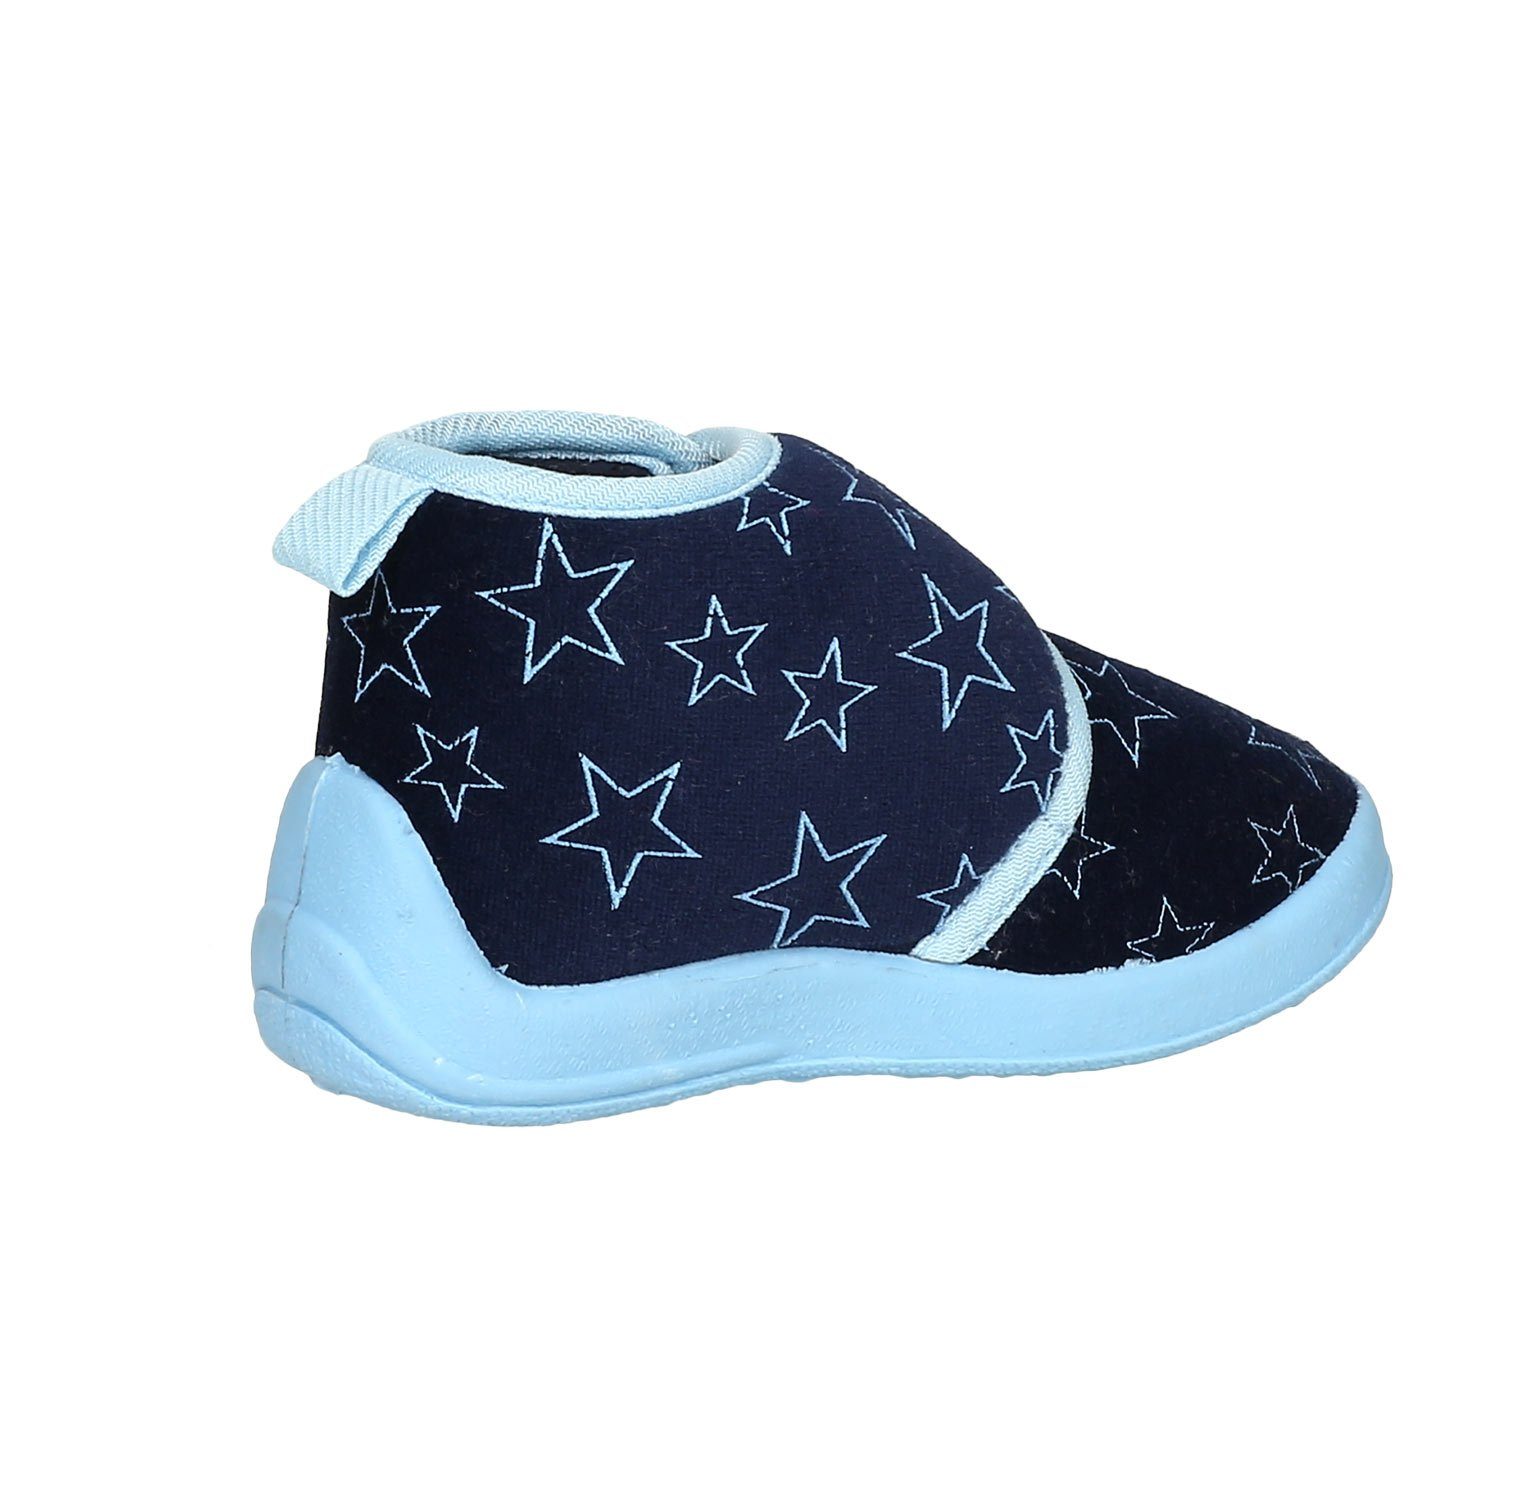 Hausschuh Hausschuh Playshoes Pastell Marine